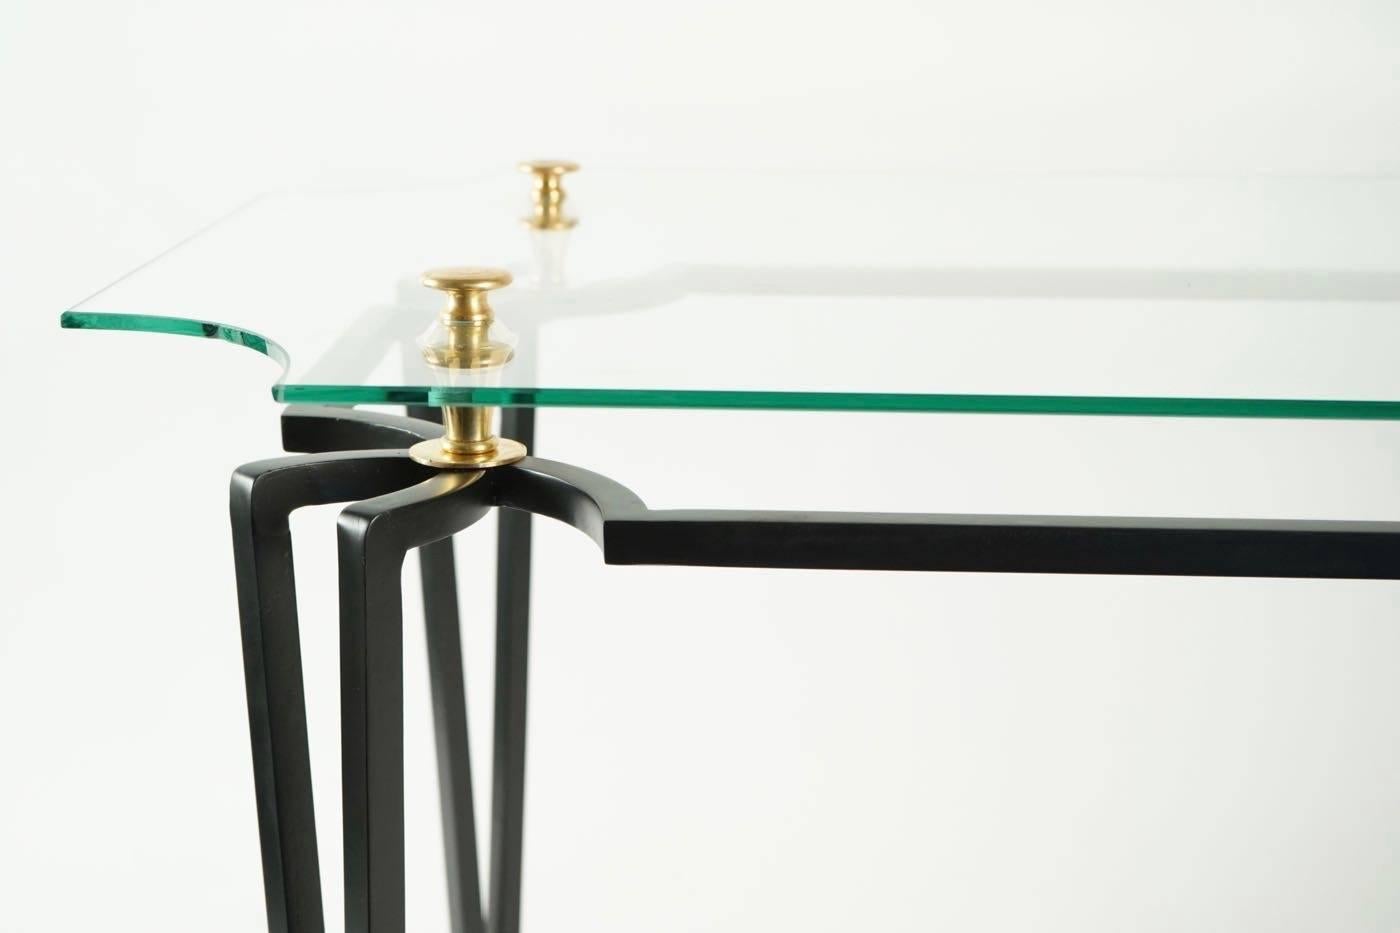 1940 wrought iron low table.
Structure made of black lacquered wrought iron. 
The glass top is mounted on four brass columns.
 